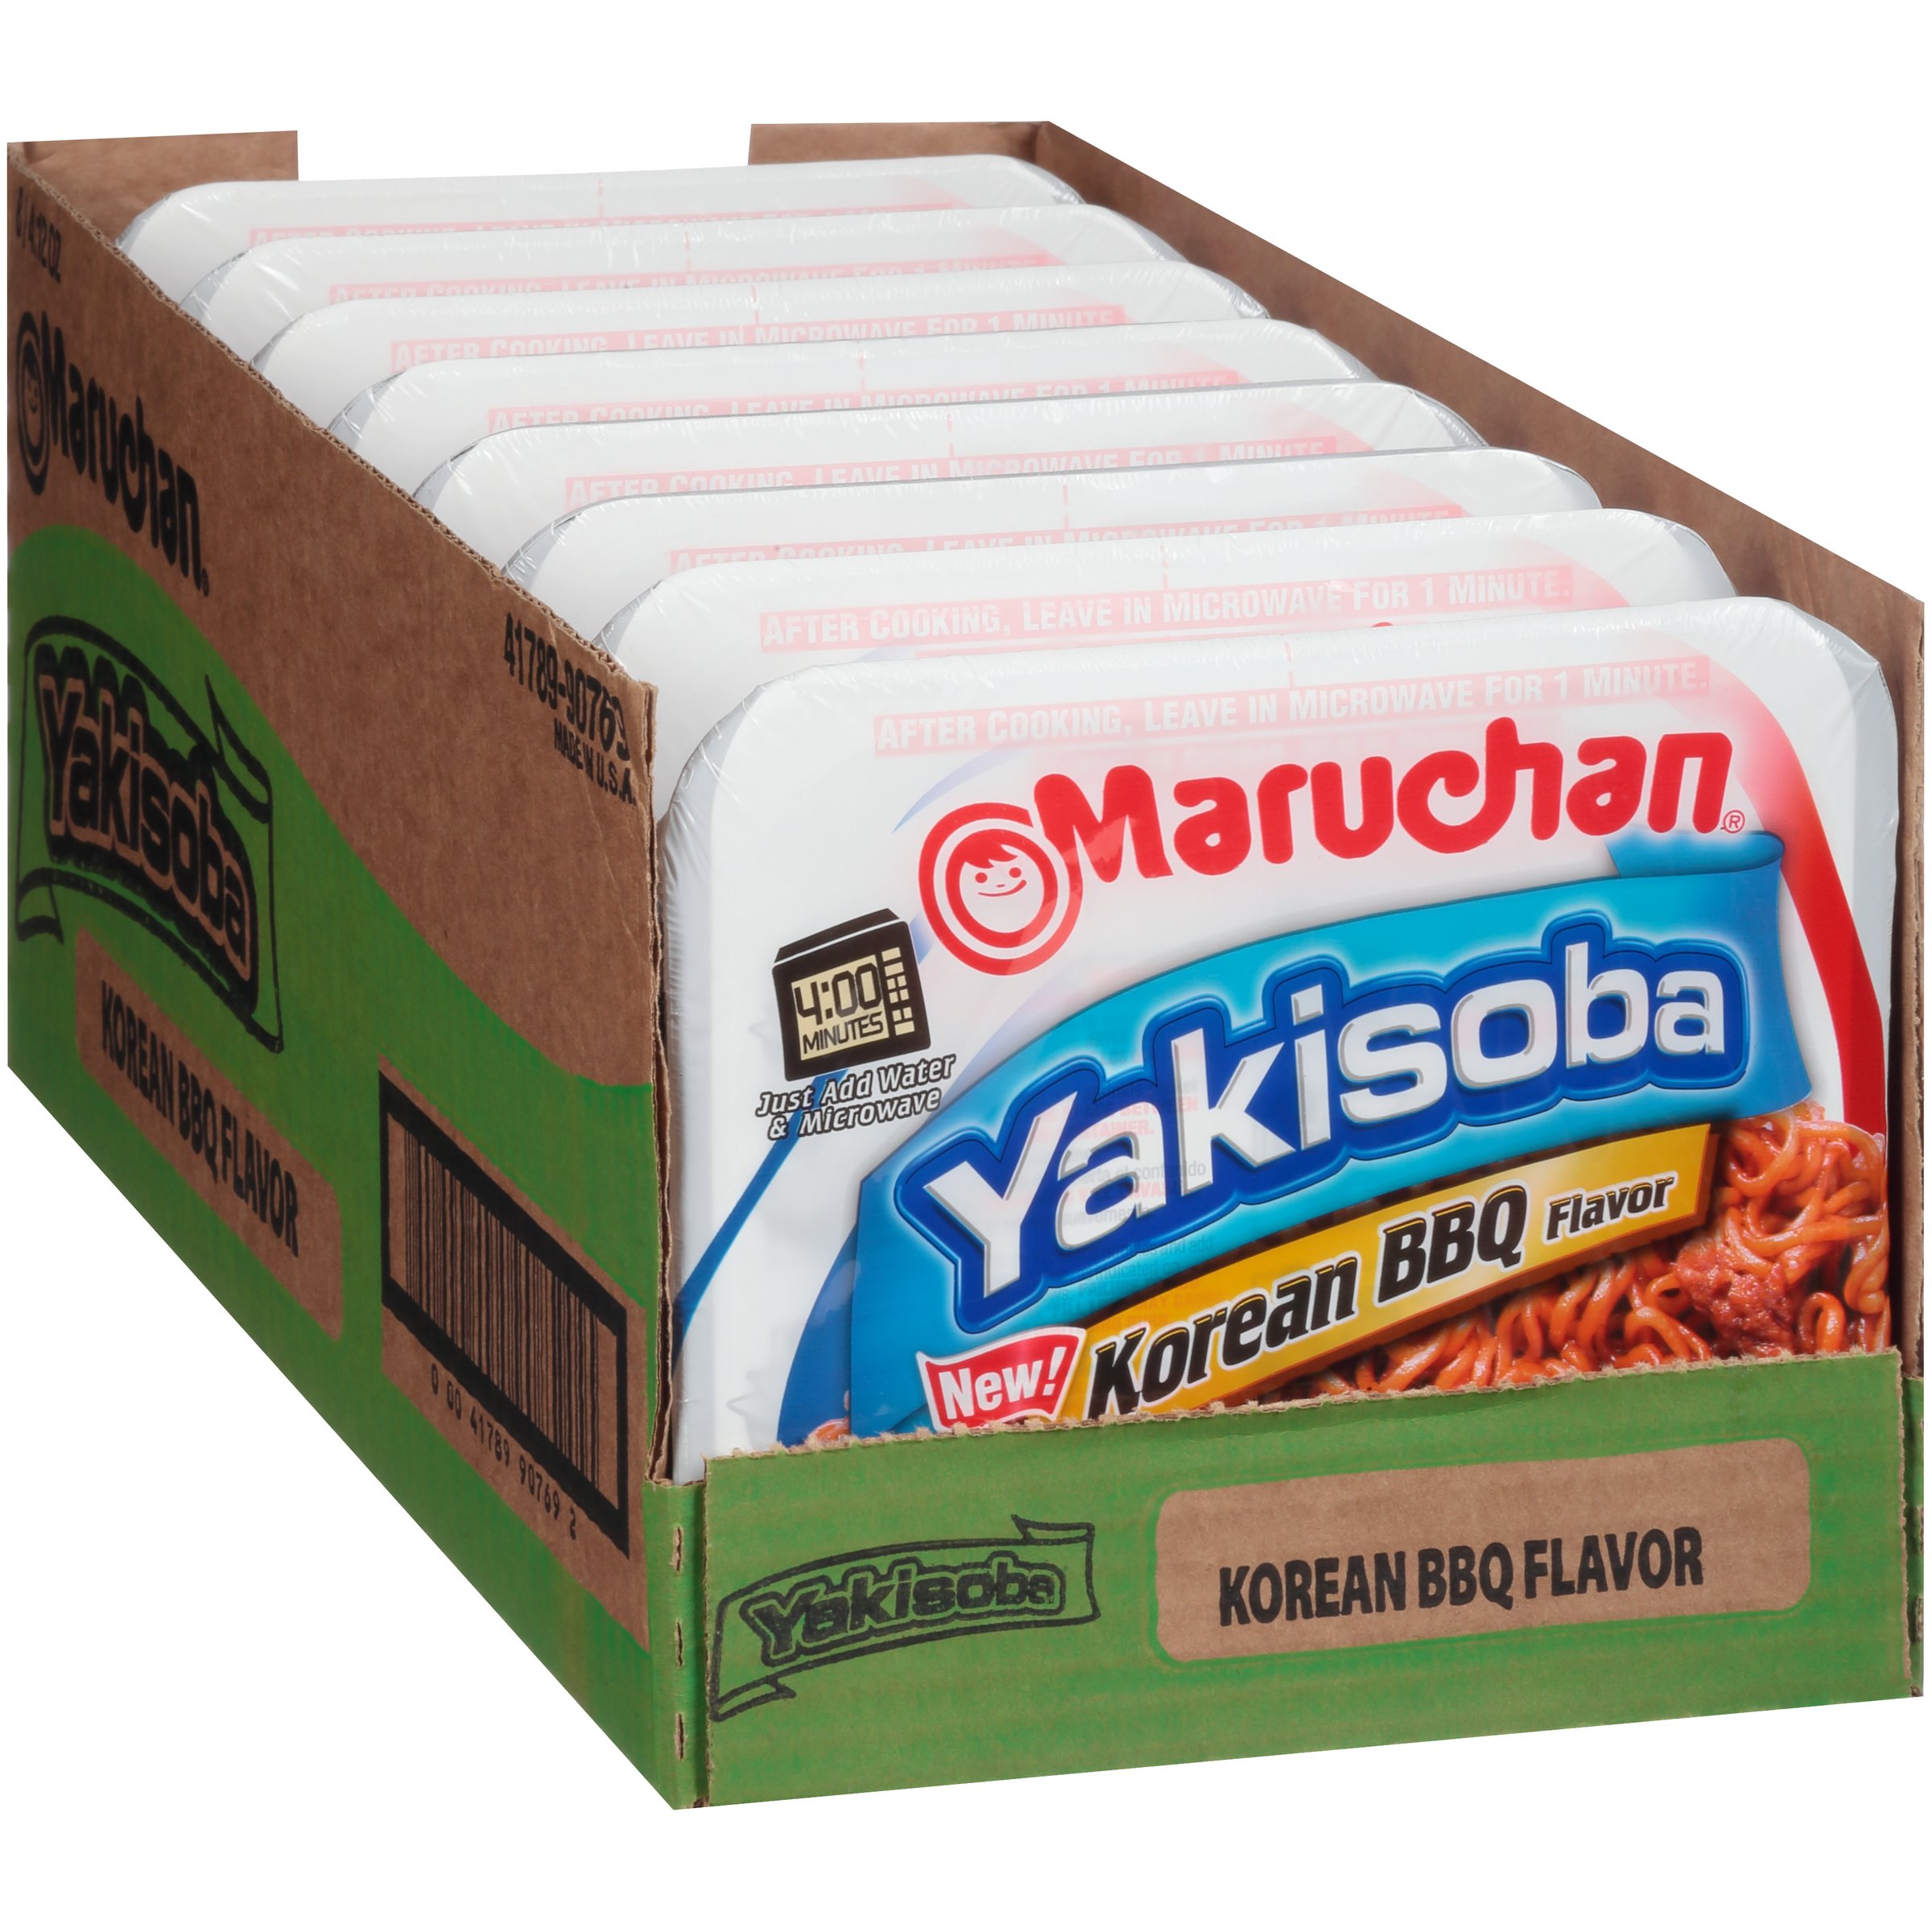 8-Pack 4.12-Oz Maruchan Yakisoba Korean BBQ flavor Noodles $7.14 + Free Shipping w/ Prime or on $35+